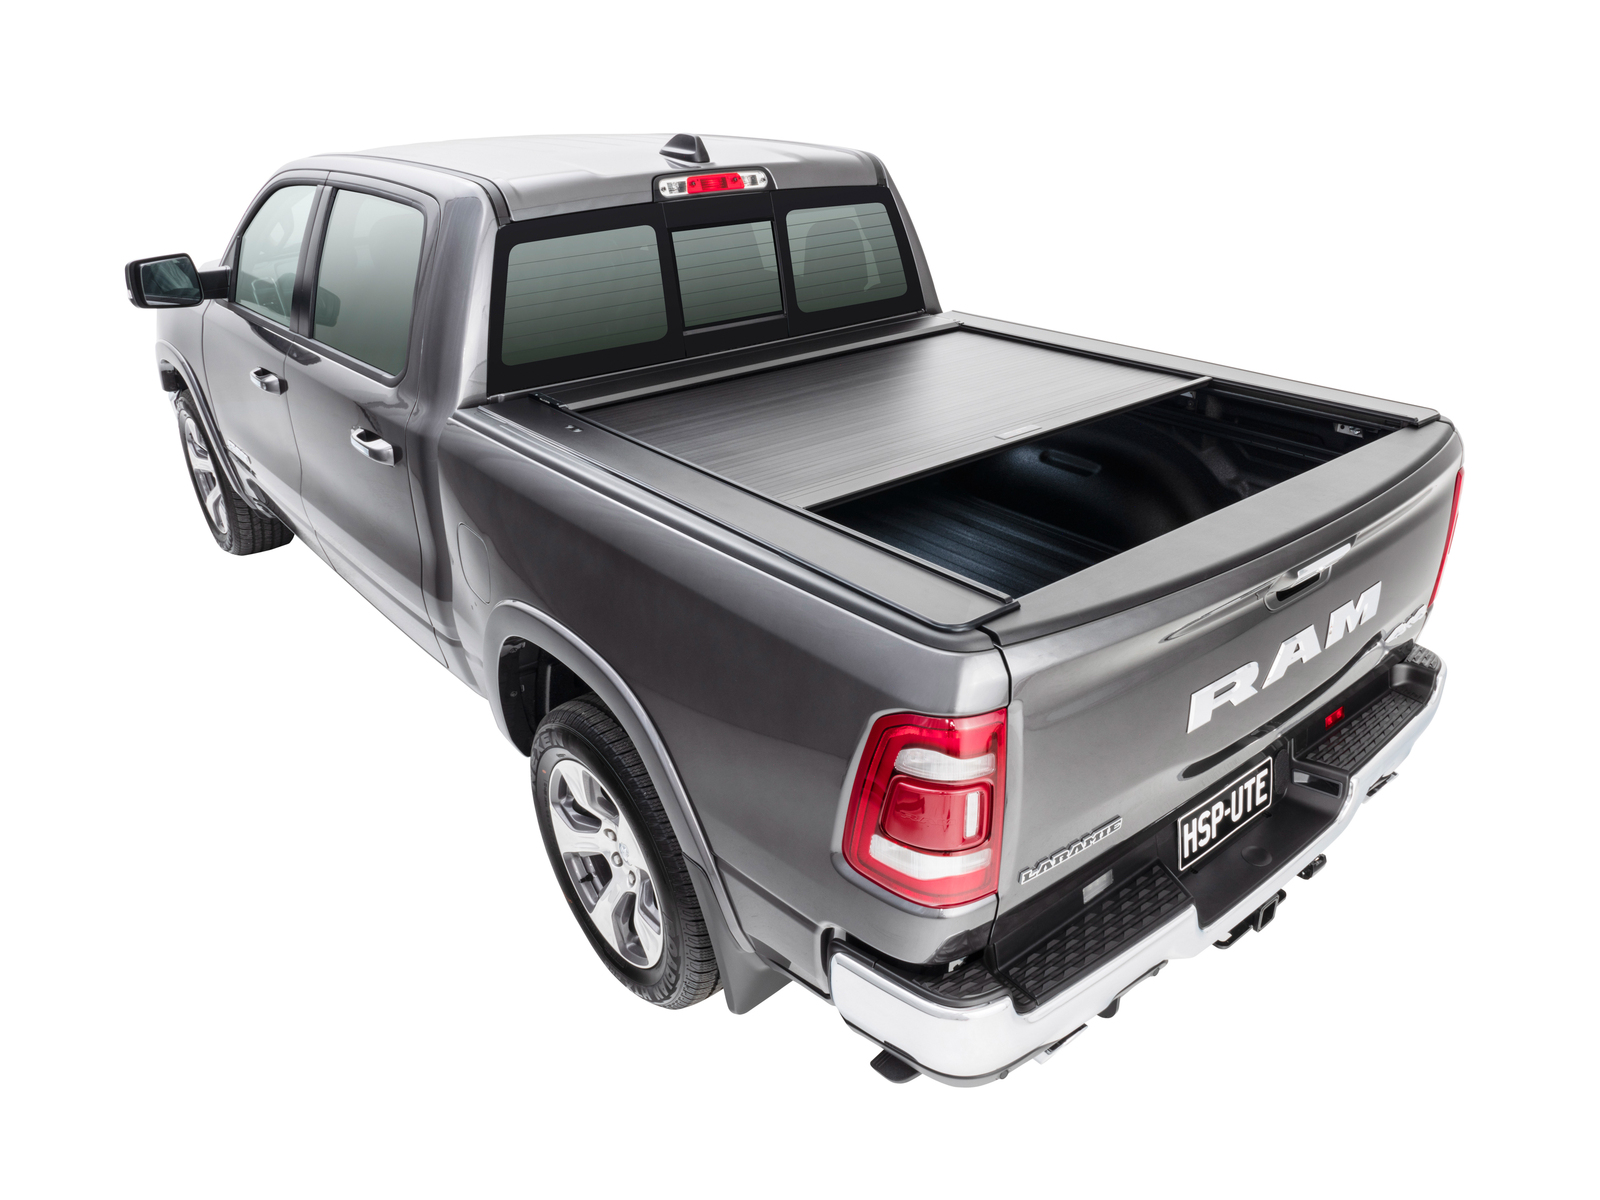 HSP Roll R Cover Series 3 To Suit Ram 1500 DT 2021+ 5’7" Tub 